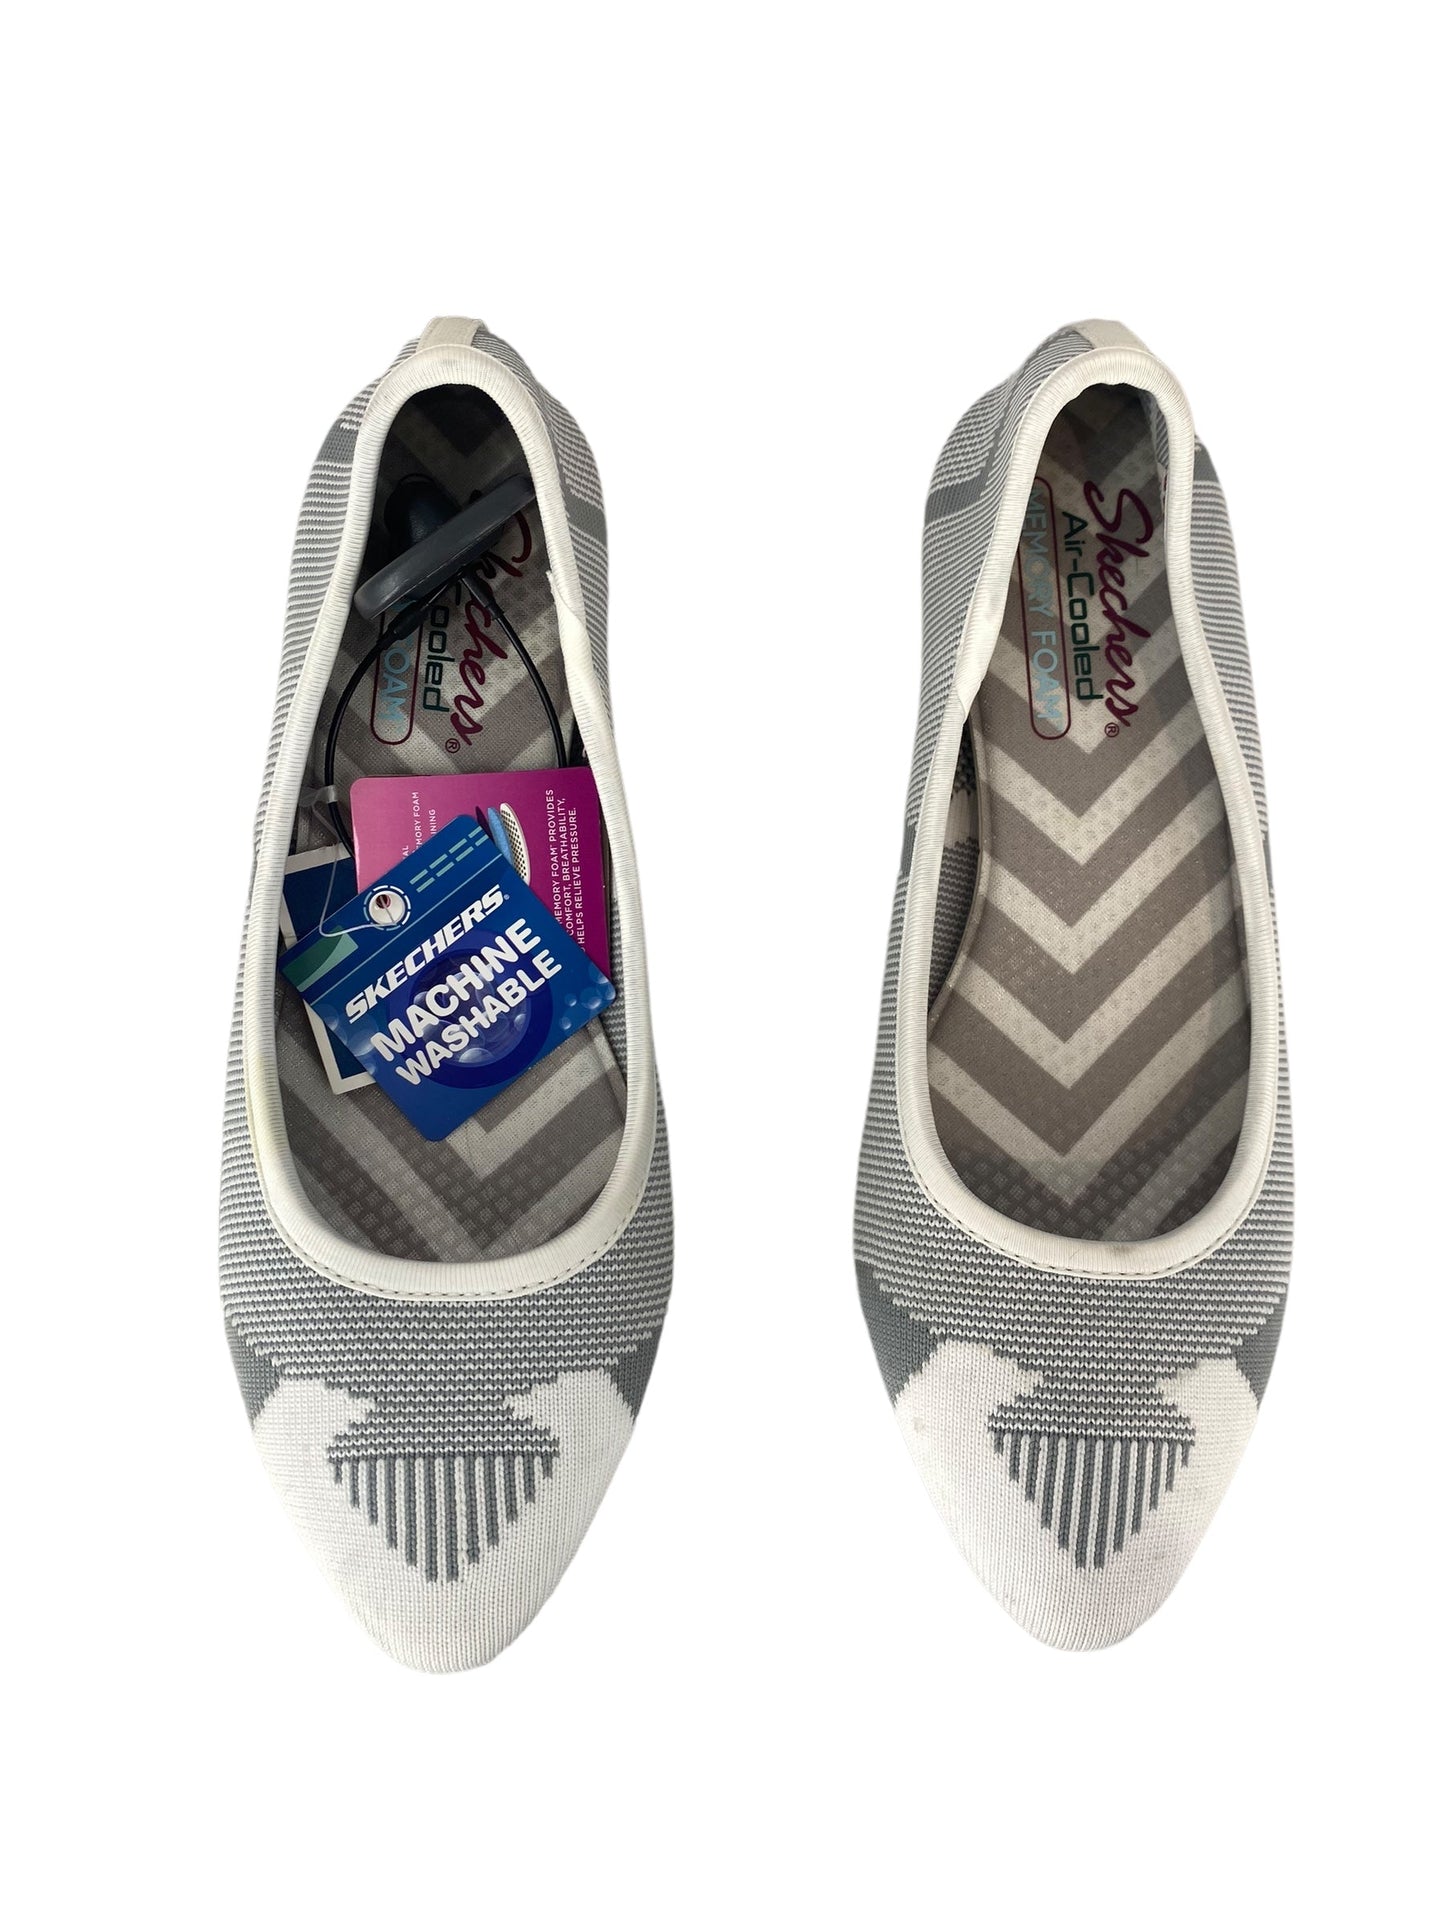 Grey & White Shoes Flats Skechers, Size 9.5